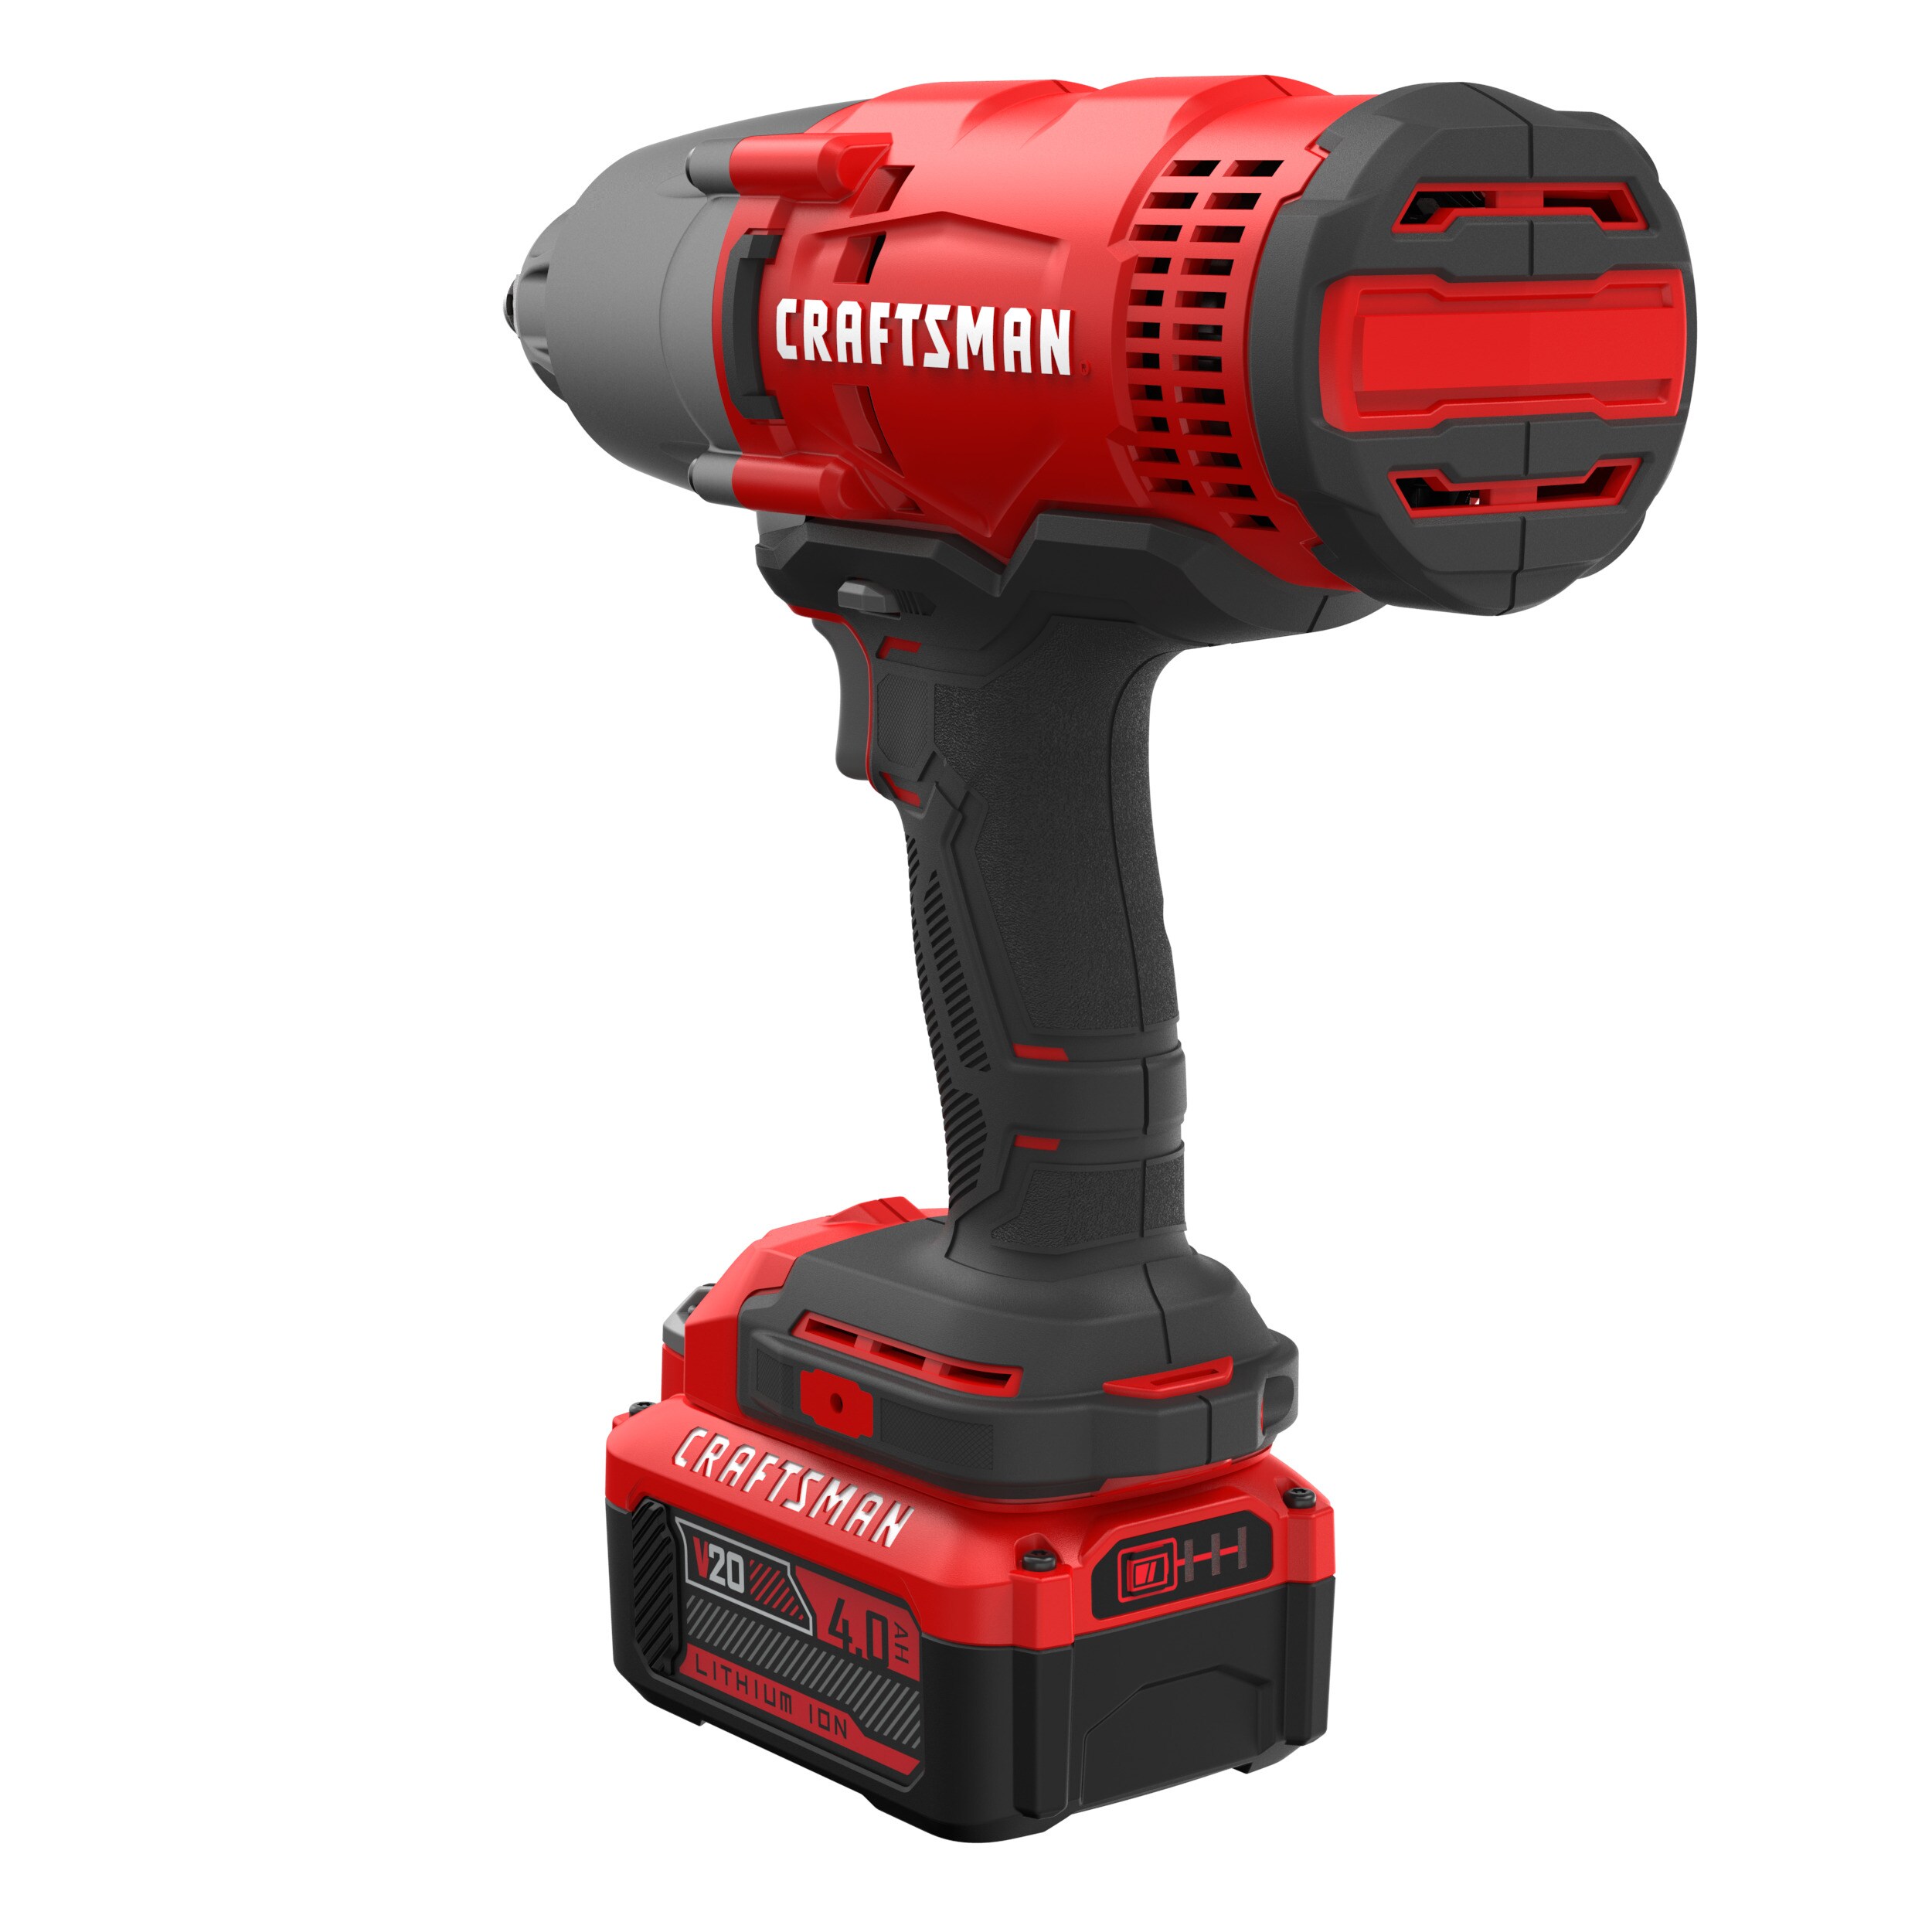 Craftsman 1/2 inch Impact Wrench Air Powered High Torque Pistol Grip Tool NEW 